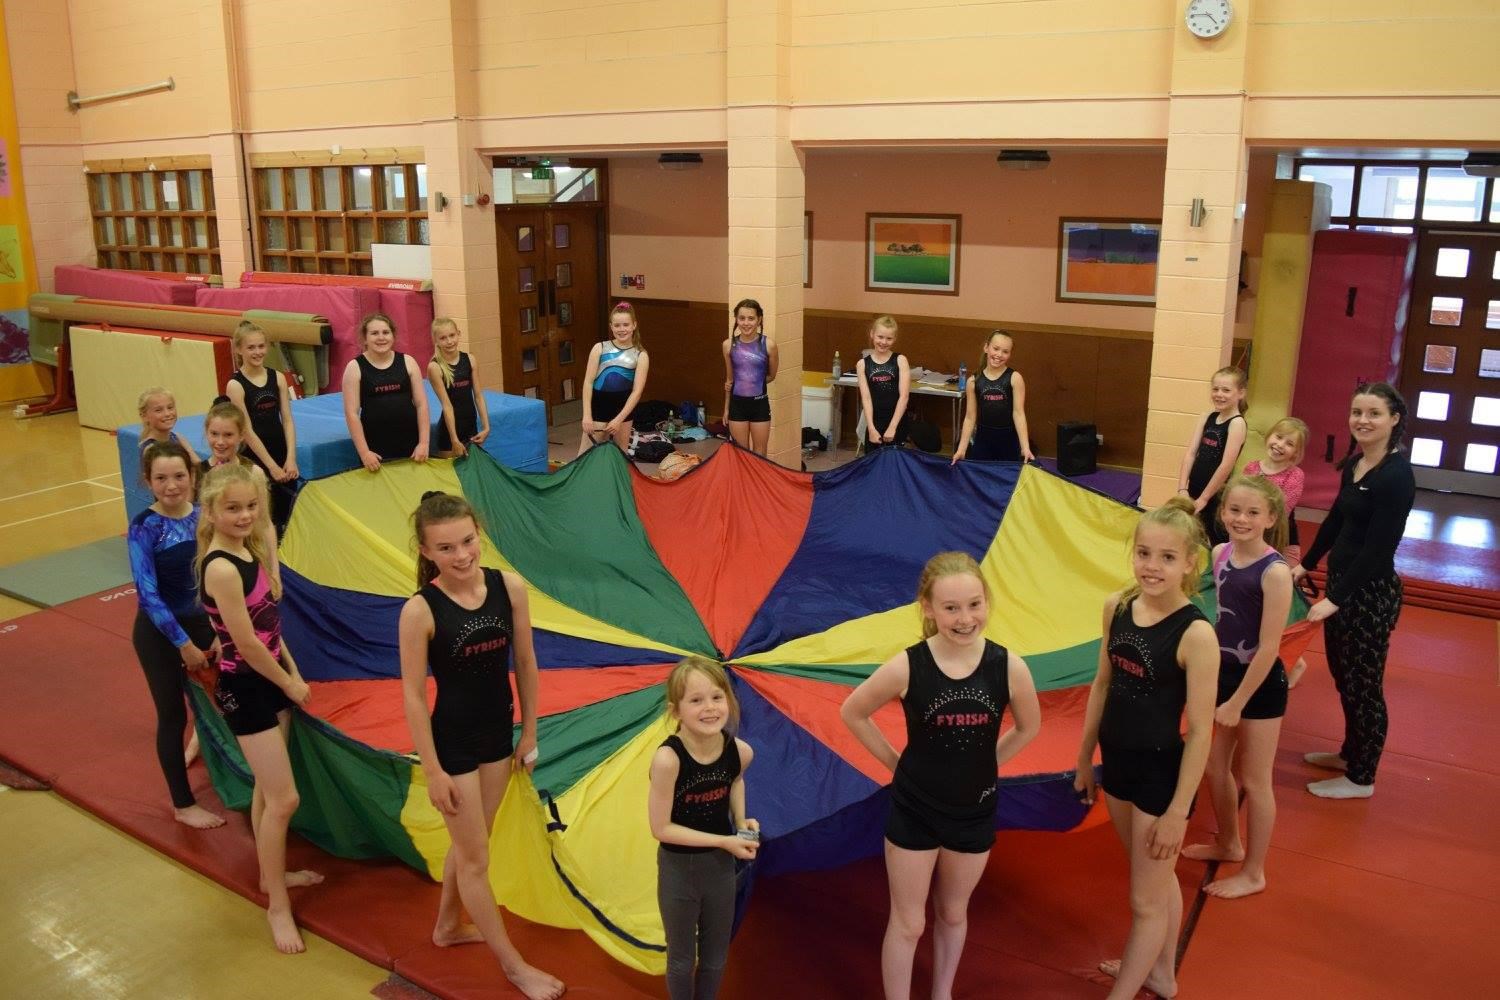 Fyrish Gymnastics Club will now extend its community work to a number of schools in Ross-shire